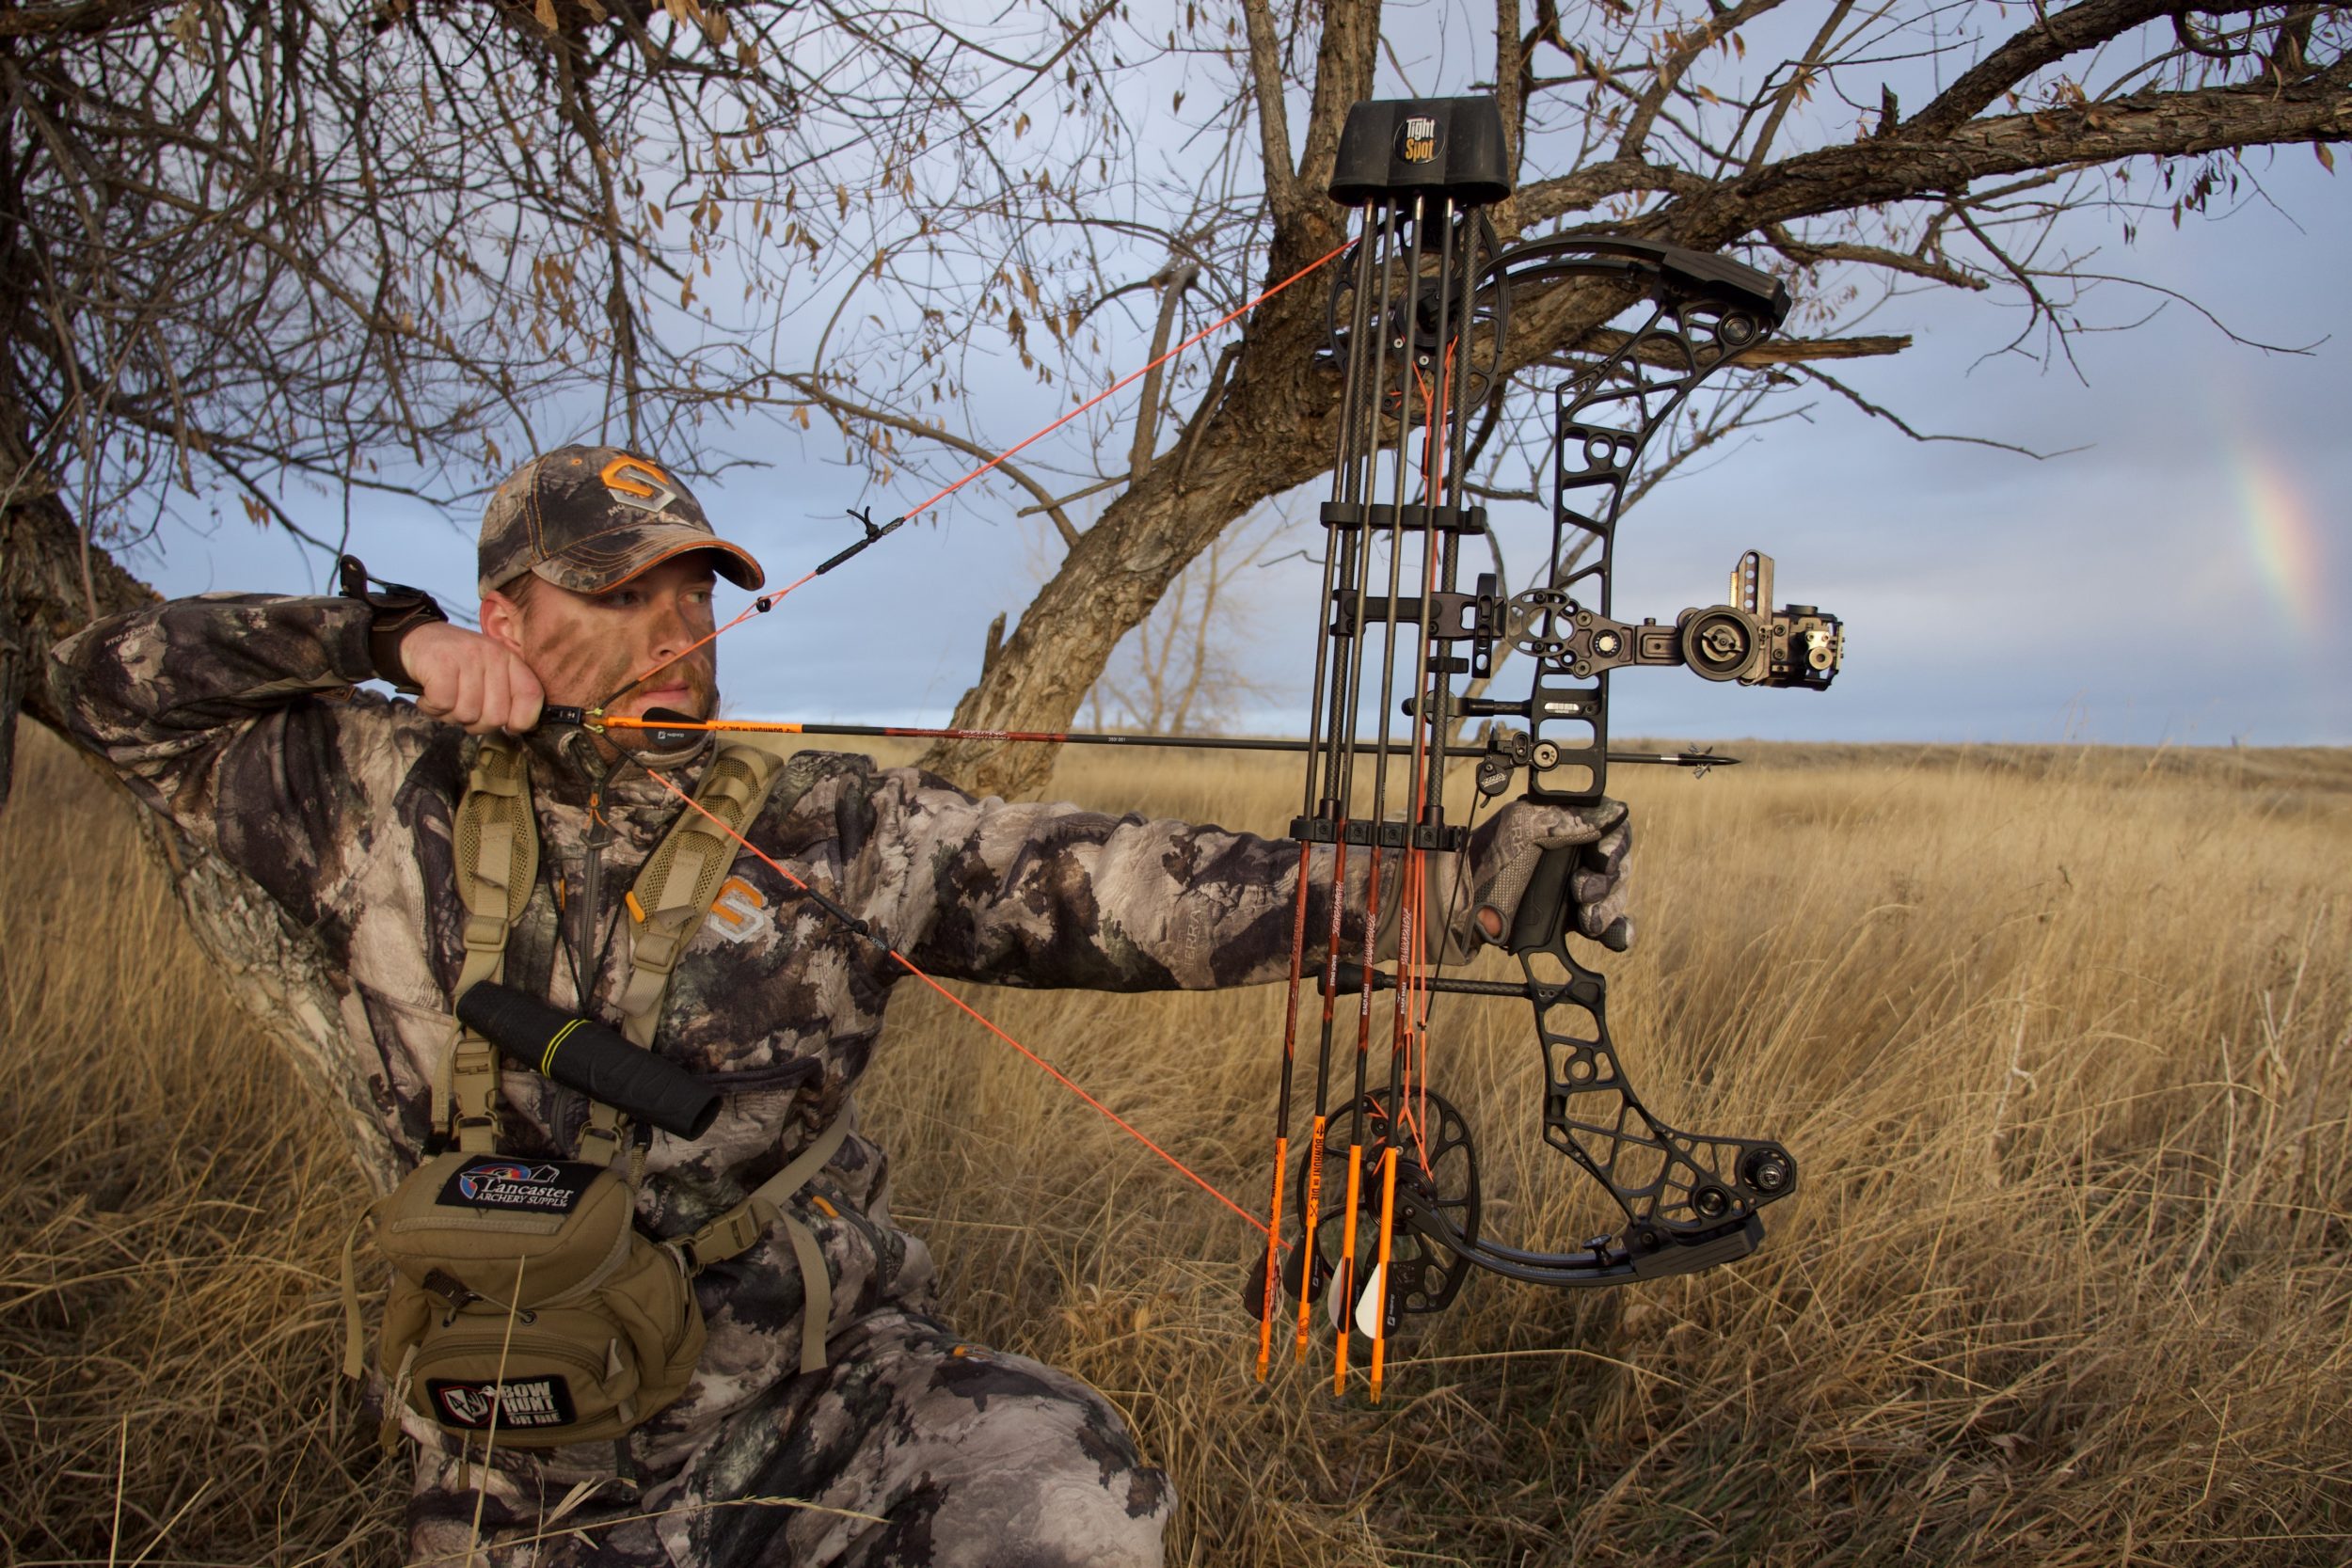 Arrow Quivers for Bowhunting